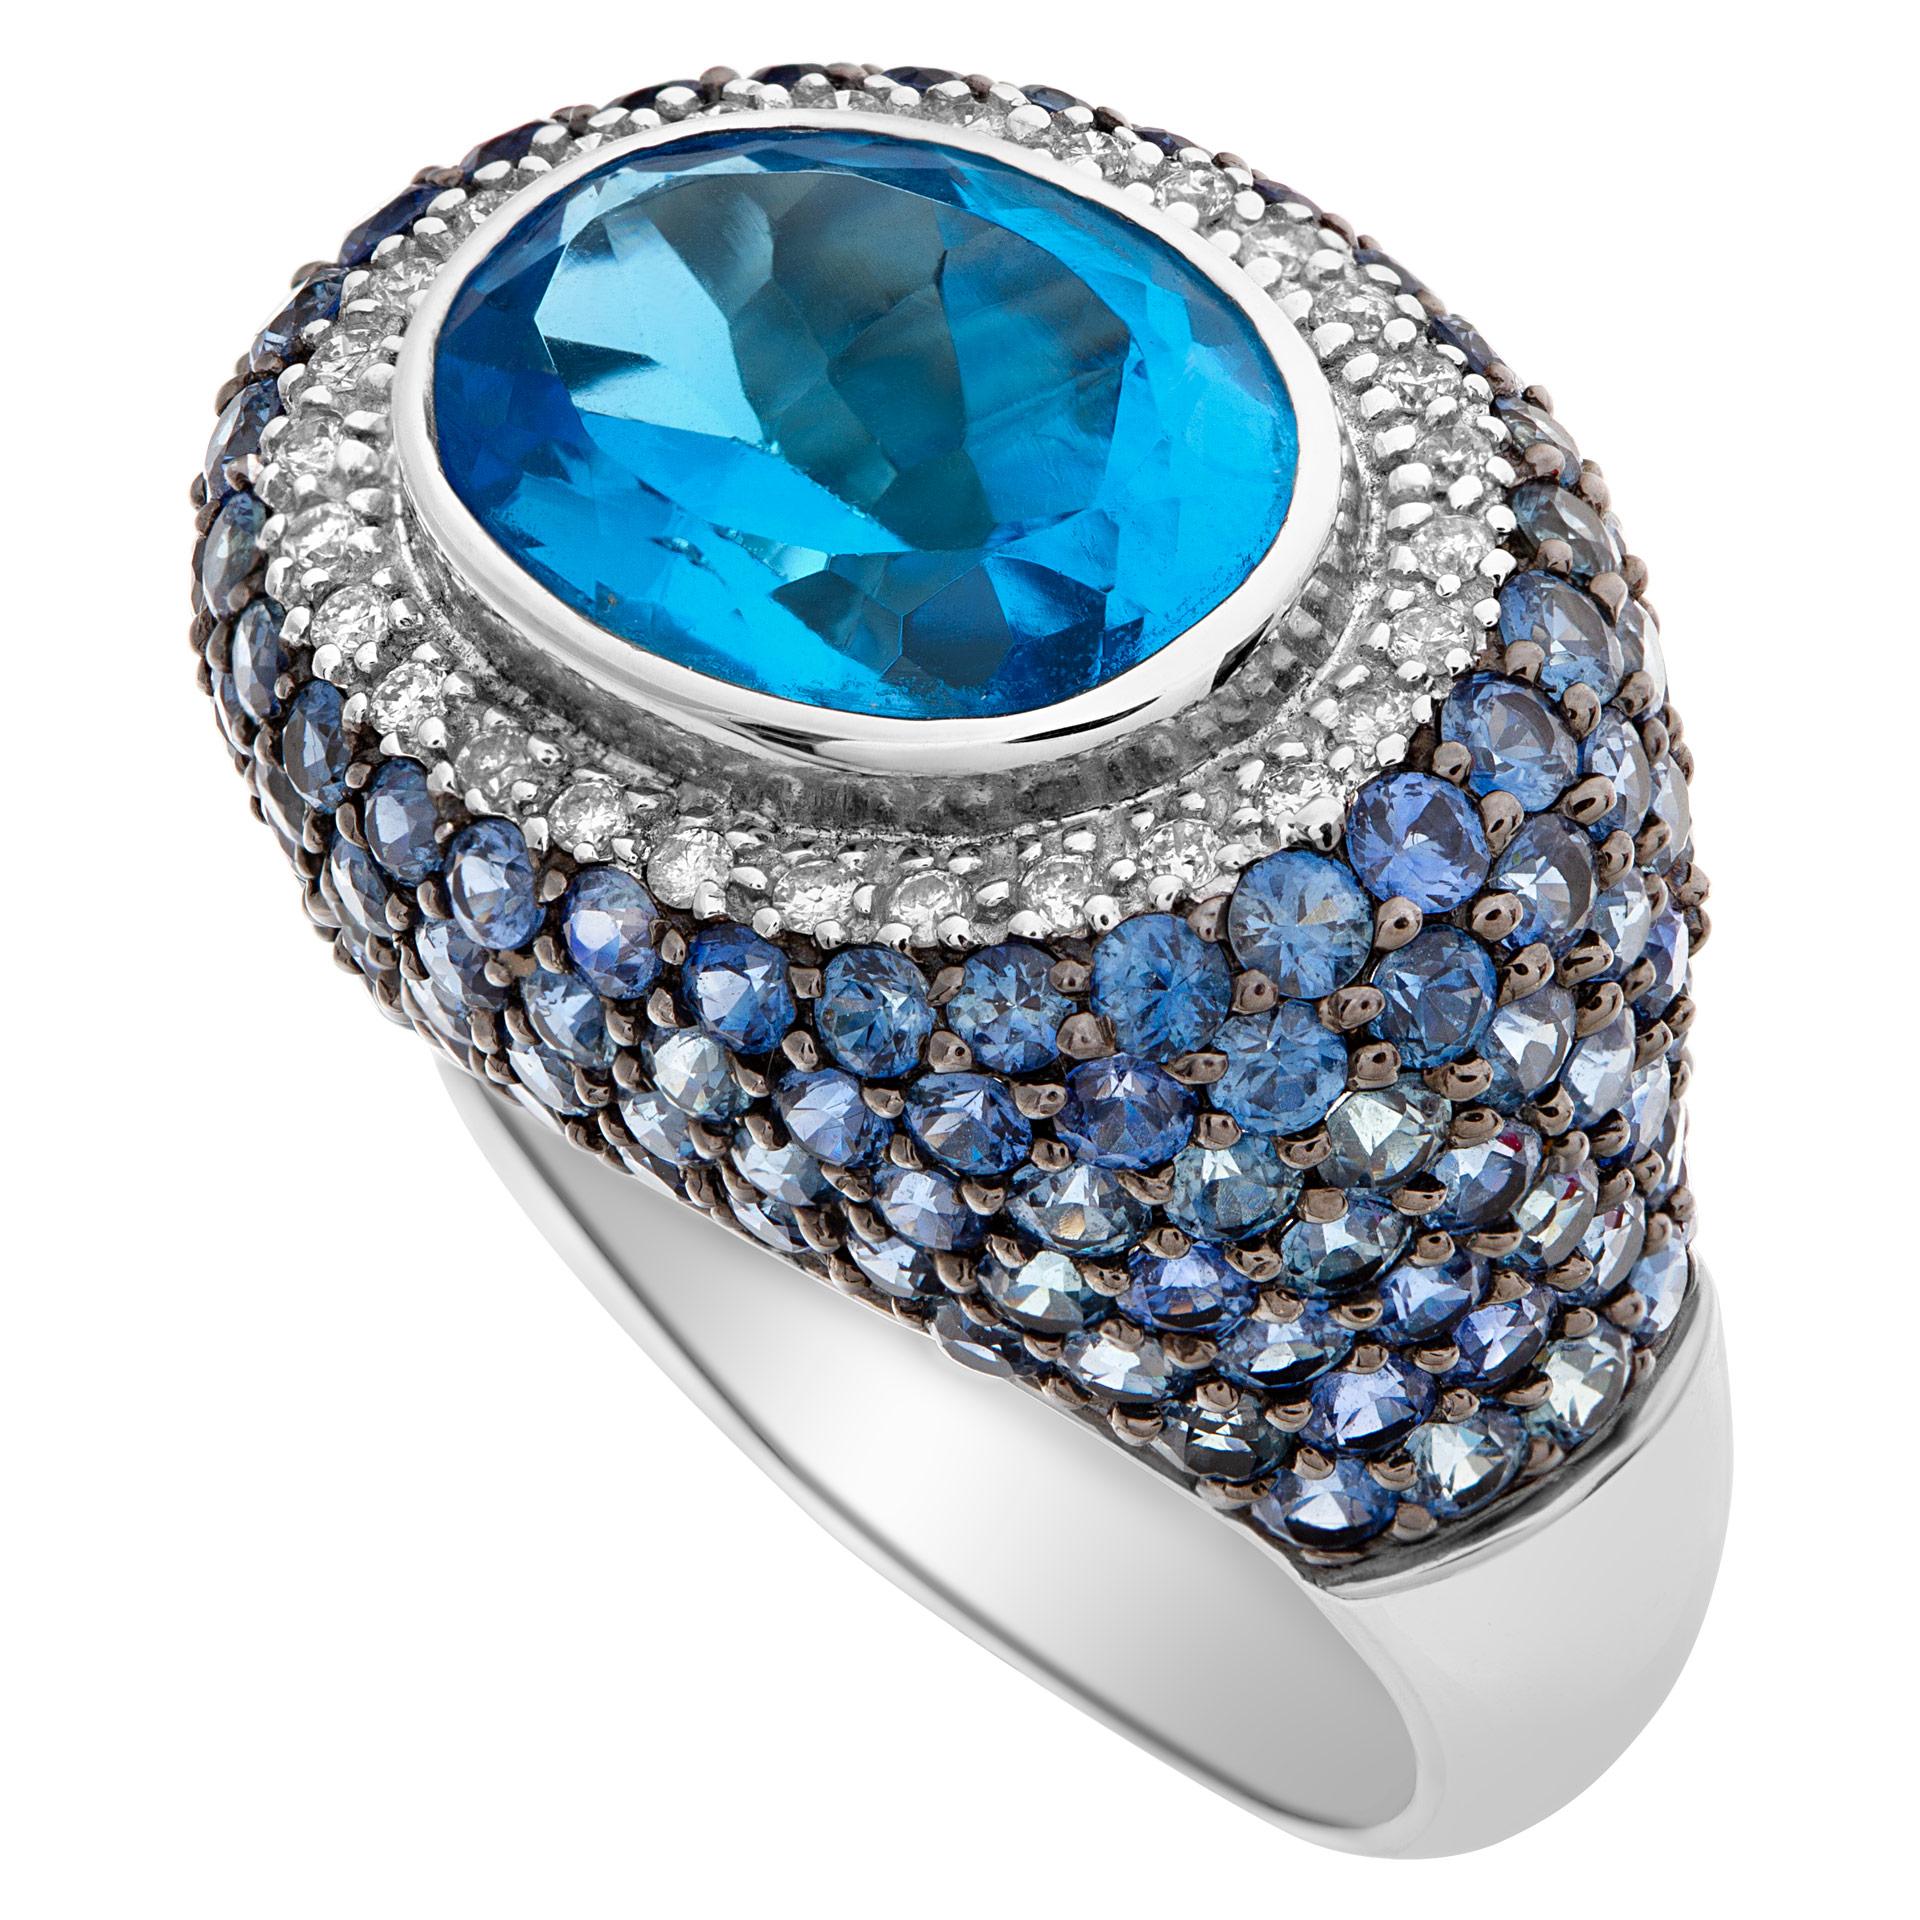 Eye catching cocktail ring with a 7 carat oval cut blue topaz surrounded by blue sapphires & diamonds set in 14K yellow gold. 28 round cut diamonds approximately total weight 0.23 carat and 152 round cut blue sapphires approximate weight 6